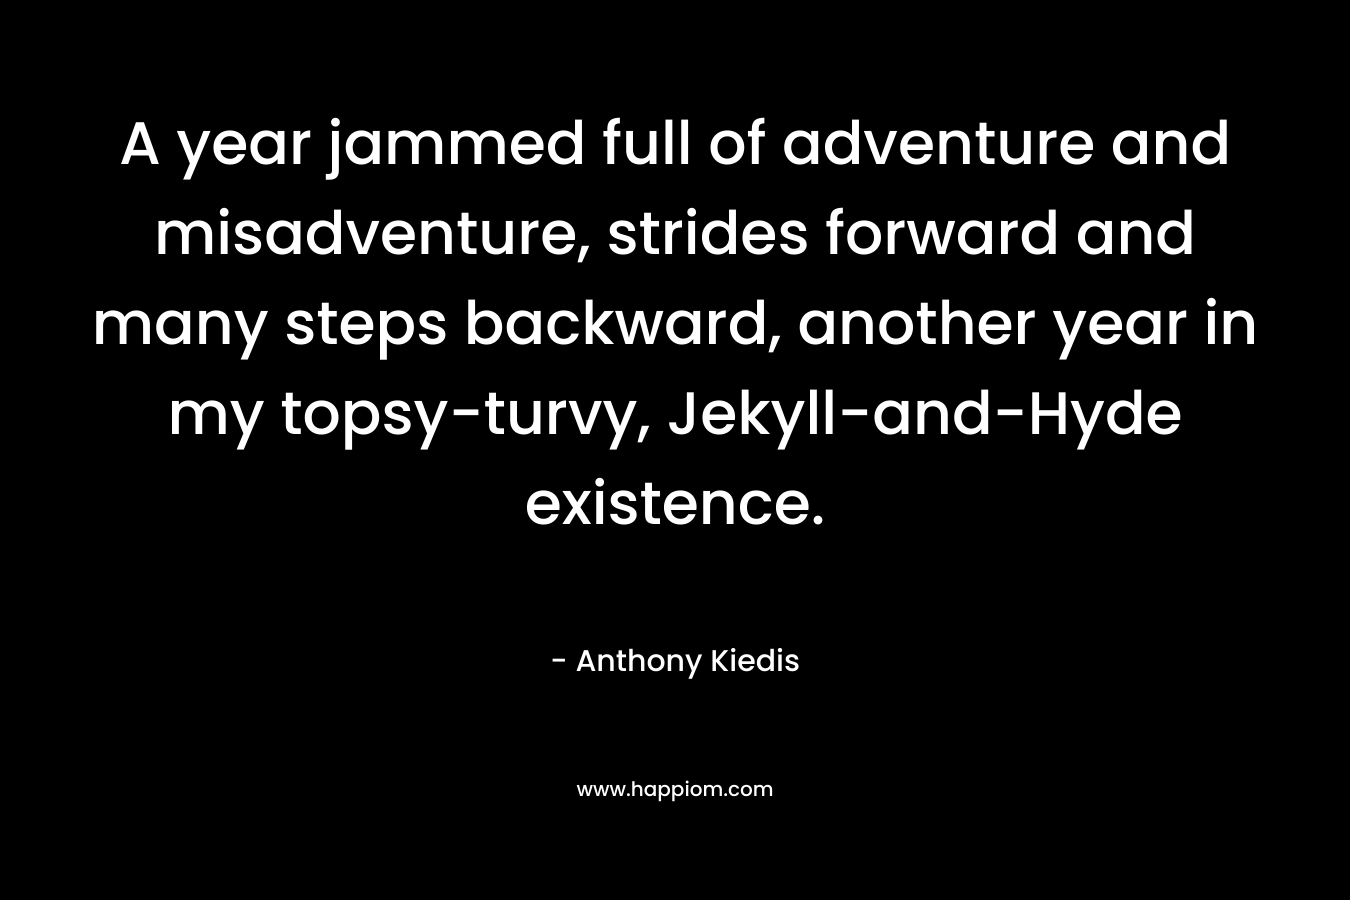 A year jammed full of adventure and misadventure, strides forward and many steps backward, another year in my topsy-turvy, Jekyll-and-Hyde existence.